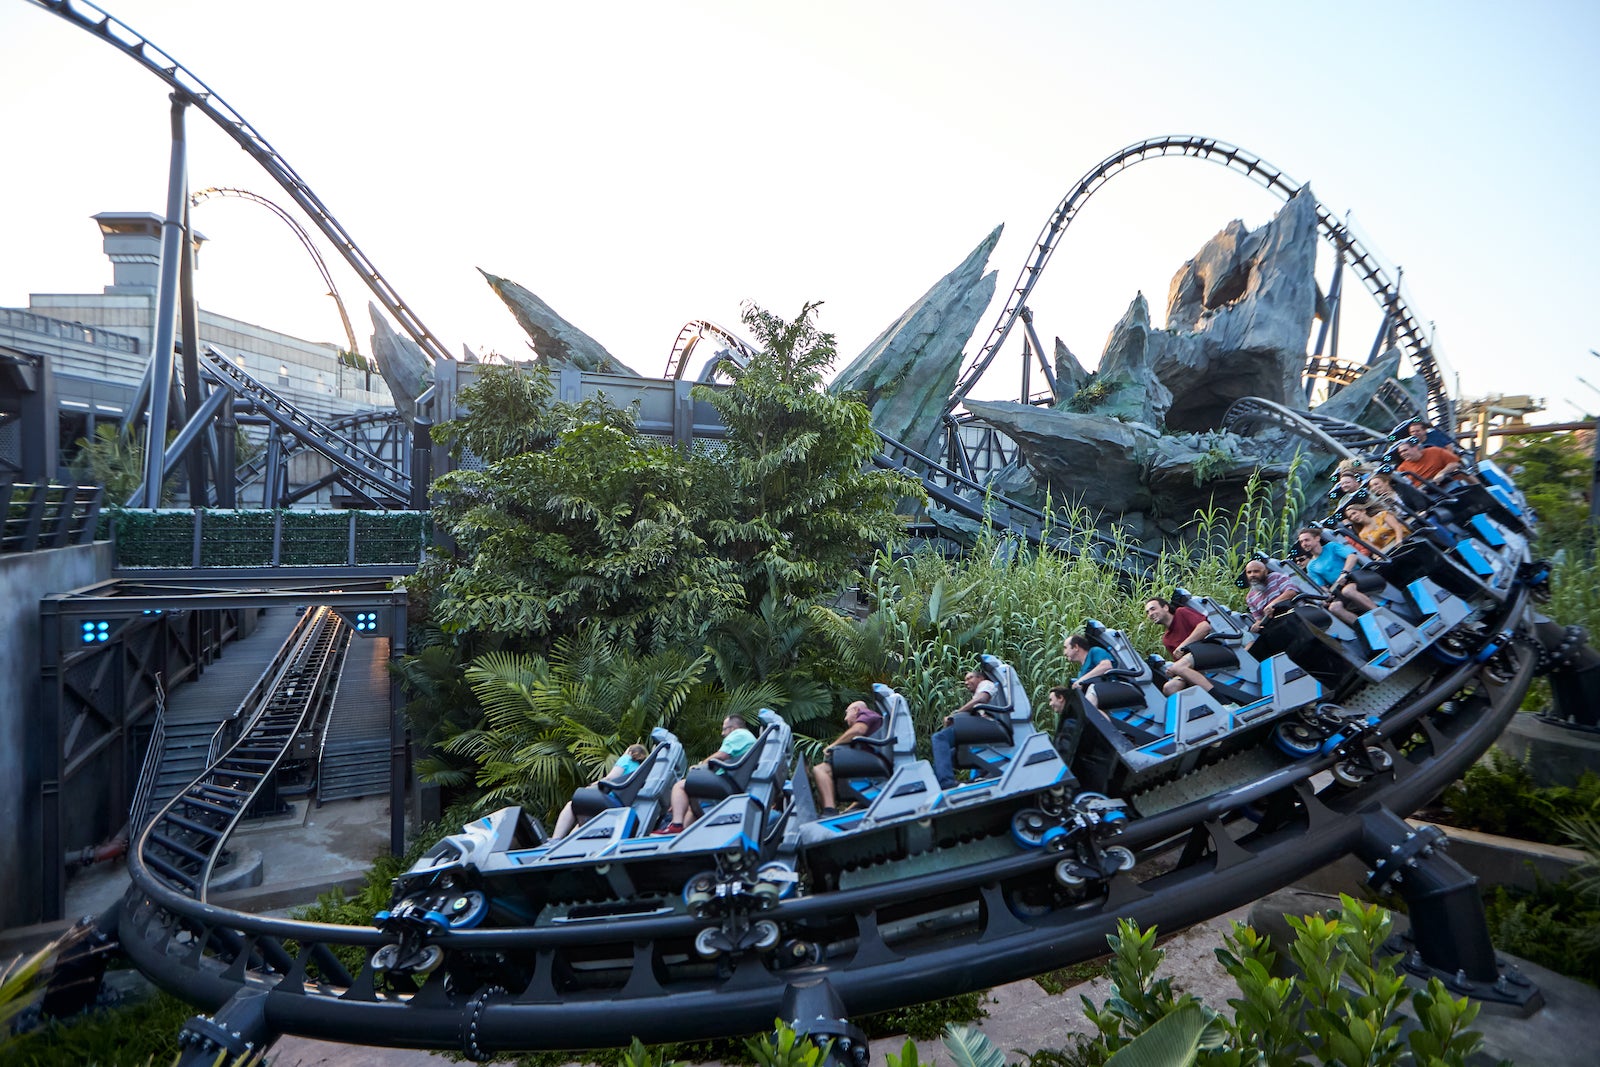 Its A 2 Hour Wait To Ride The New Jurassic World Velocicoaster At Universal Orlando — But It 